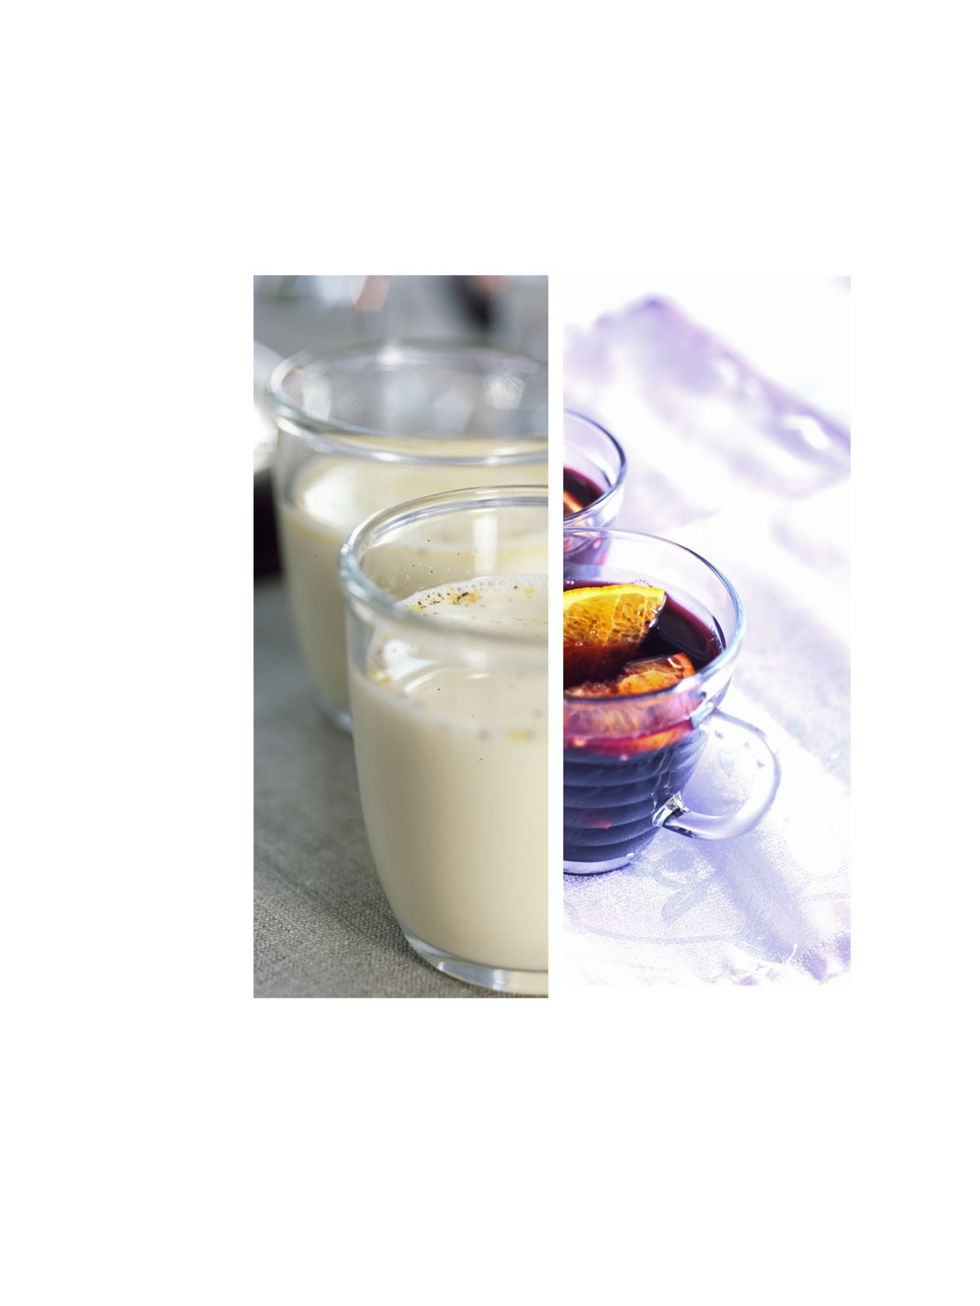 <p><strong>Egg Nog vs Mulled Wine</strong></p><p><strong>Egg Nog with Rum: </strong>440 calories for one glass with 13.3 grams of fat</p><p><strong>Mulled Wine: </strong>220 calories for a medium sized glass with 0g of fat</p><p><strong>Calories saved:</s